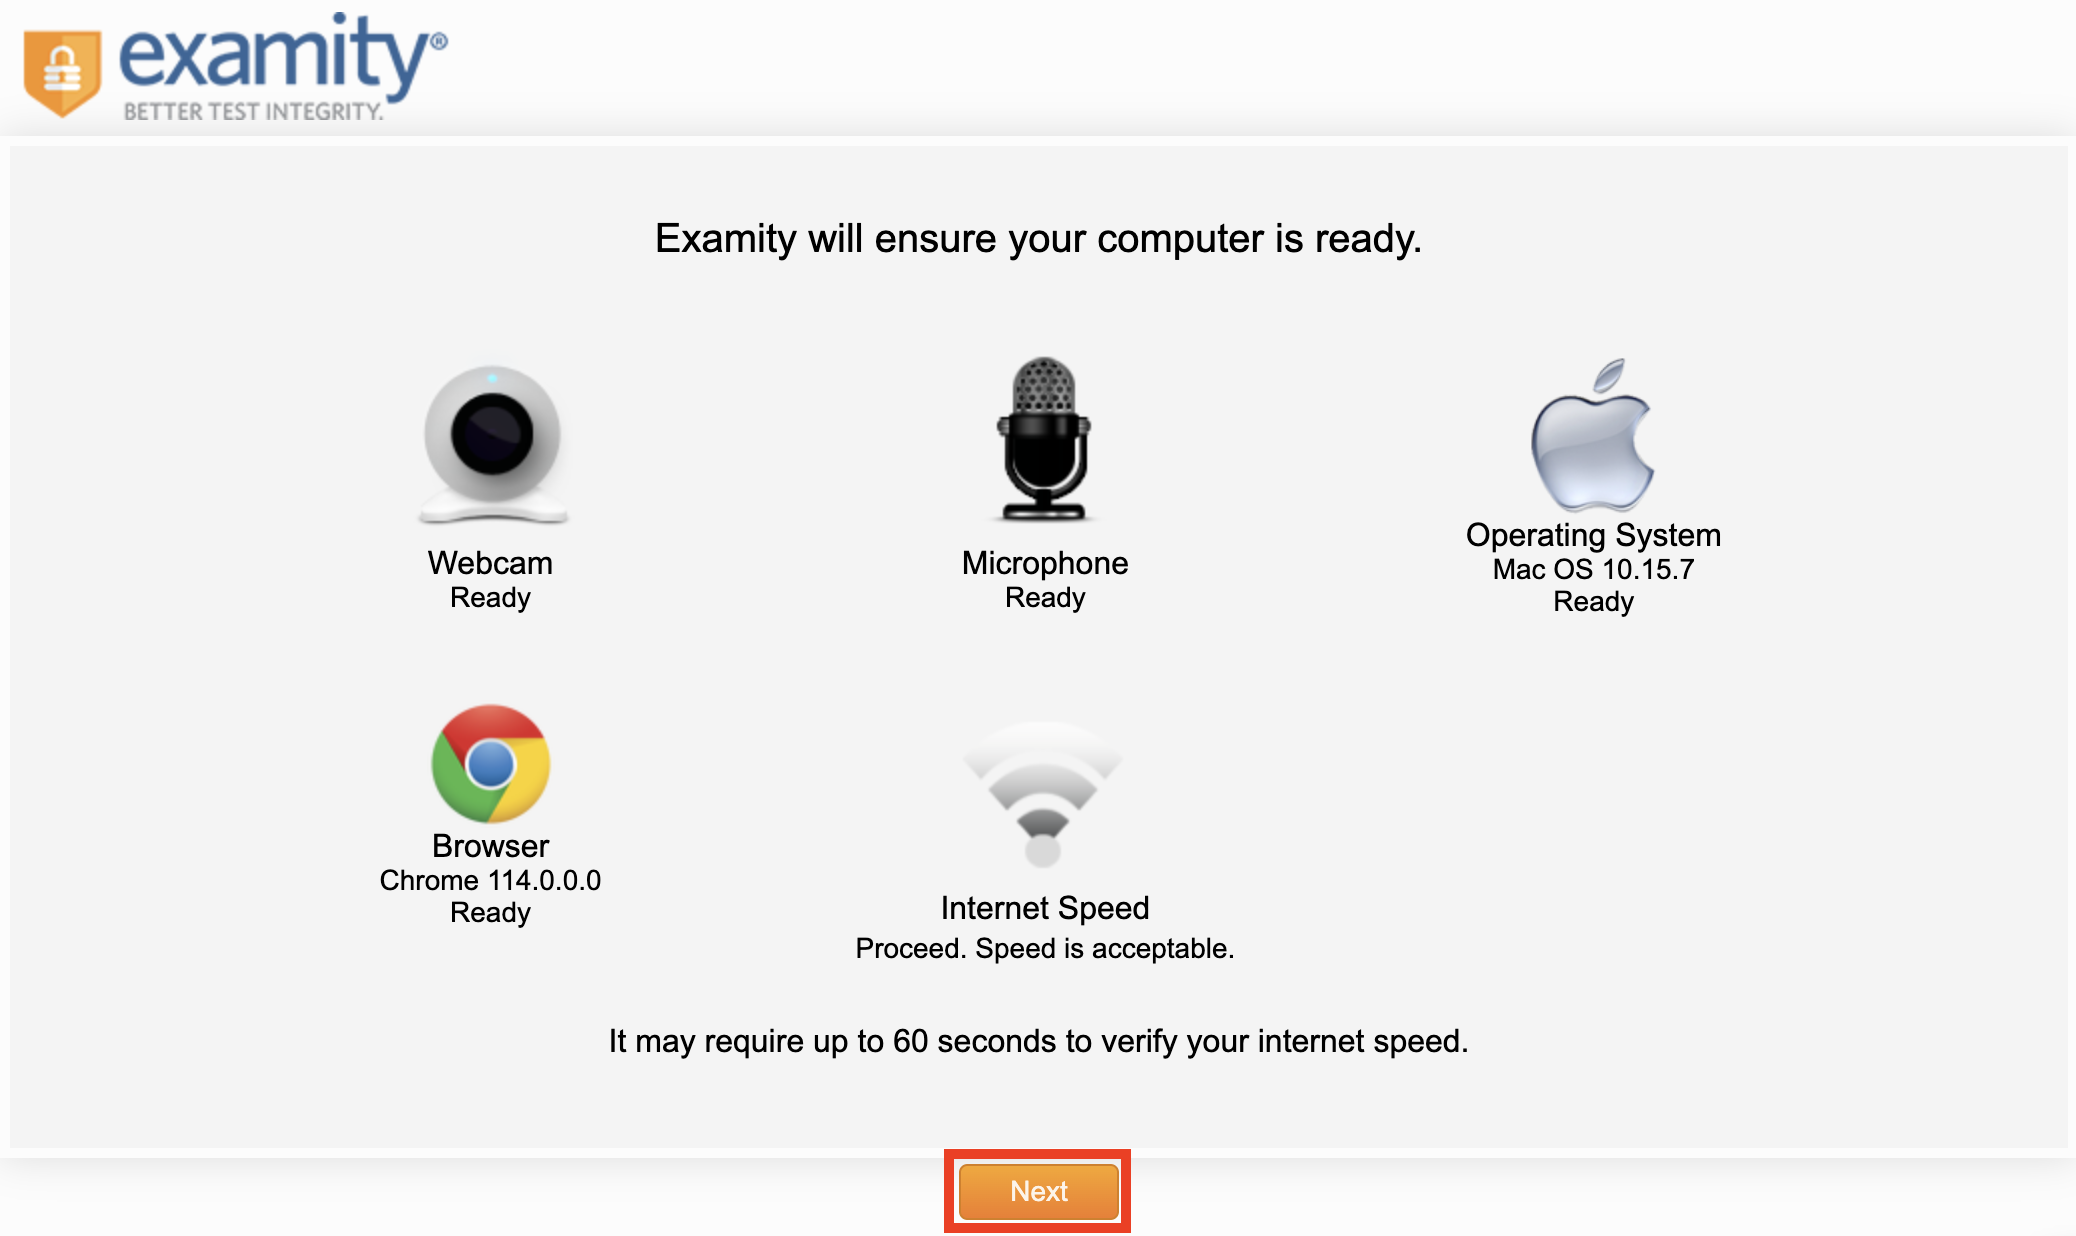 Image of the Exams portal, featuring the Examity verification check regarding webcam, microphone, operating system, browser and internet speed, with a focus on the Next call to action button.